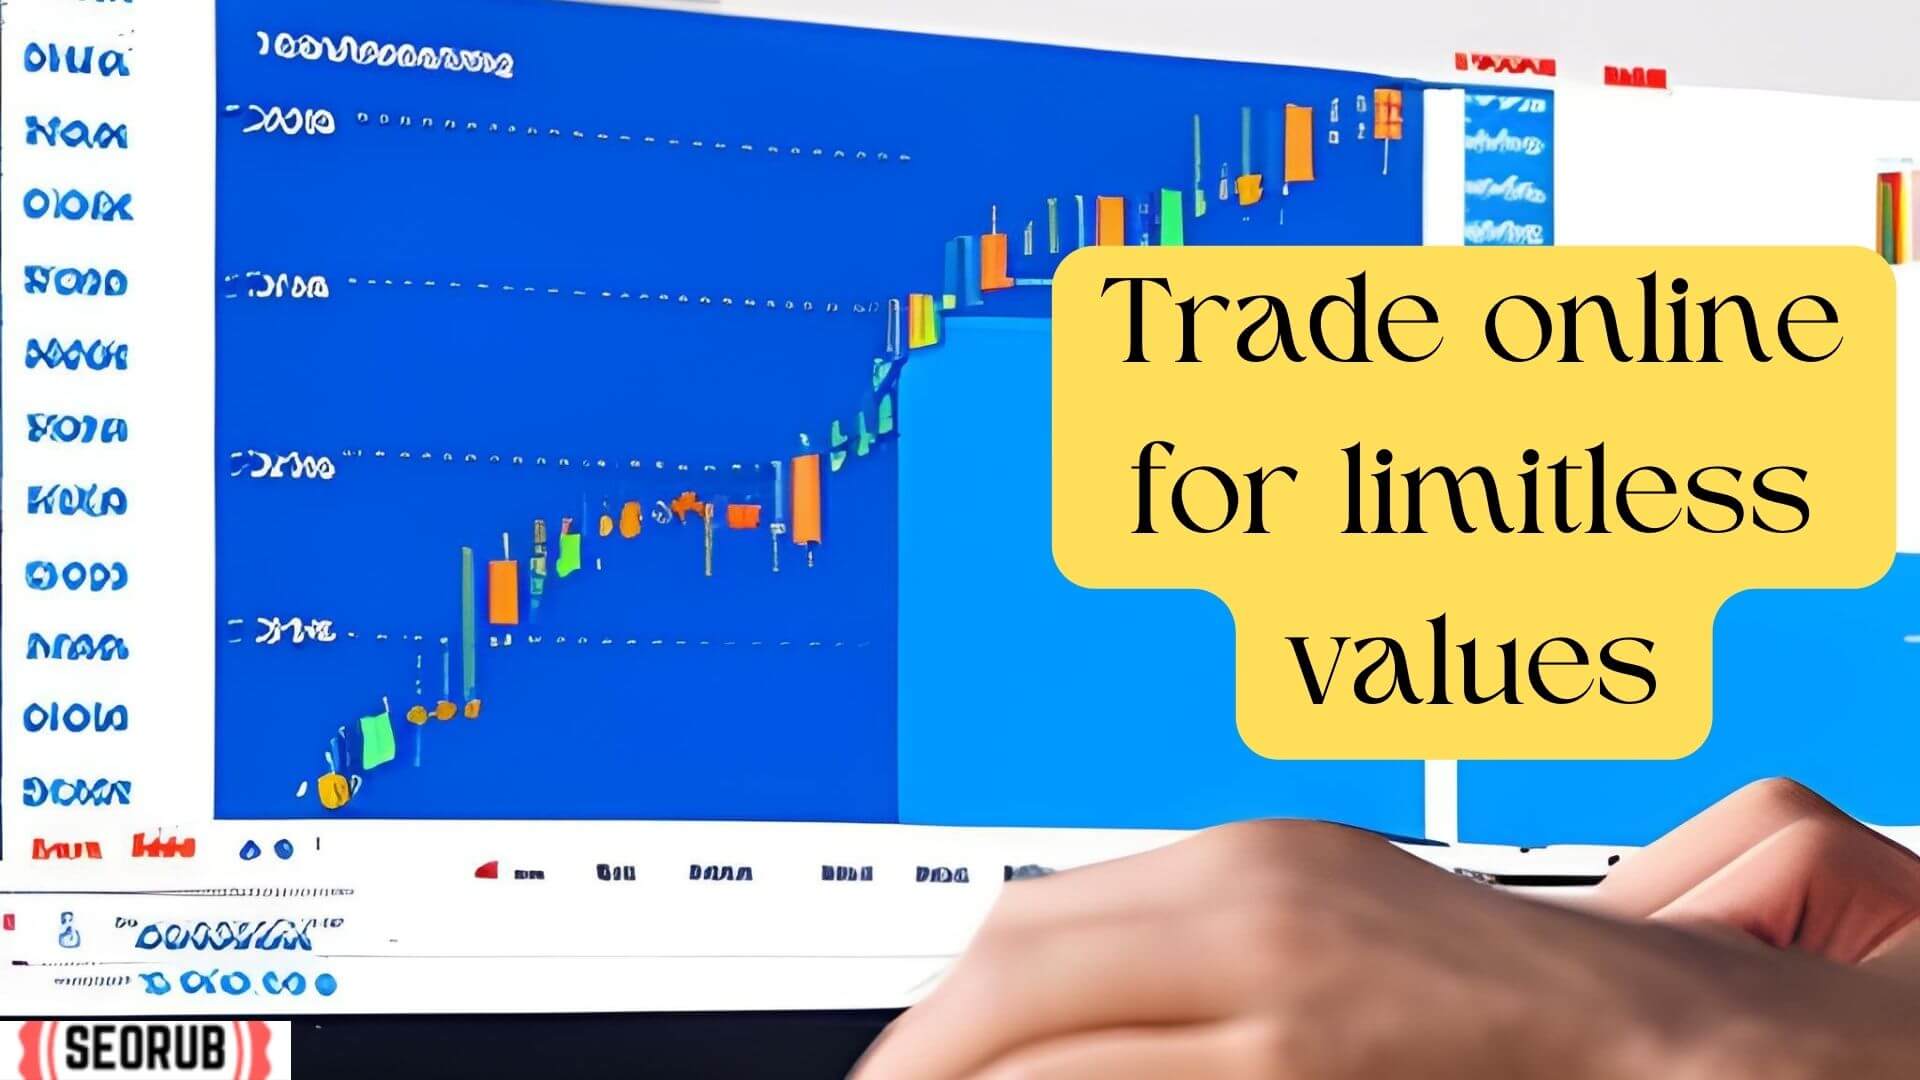 Trade online for limitless values